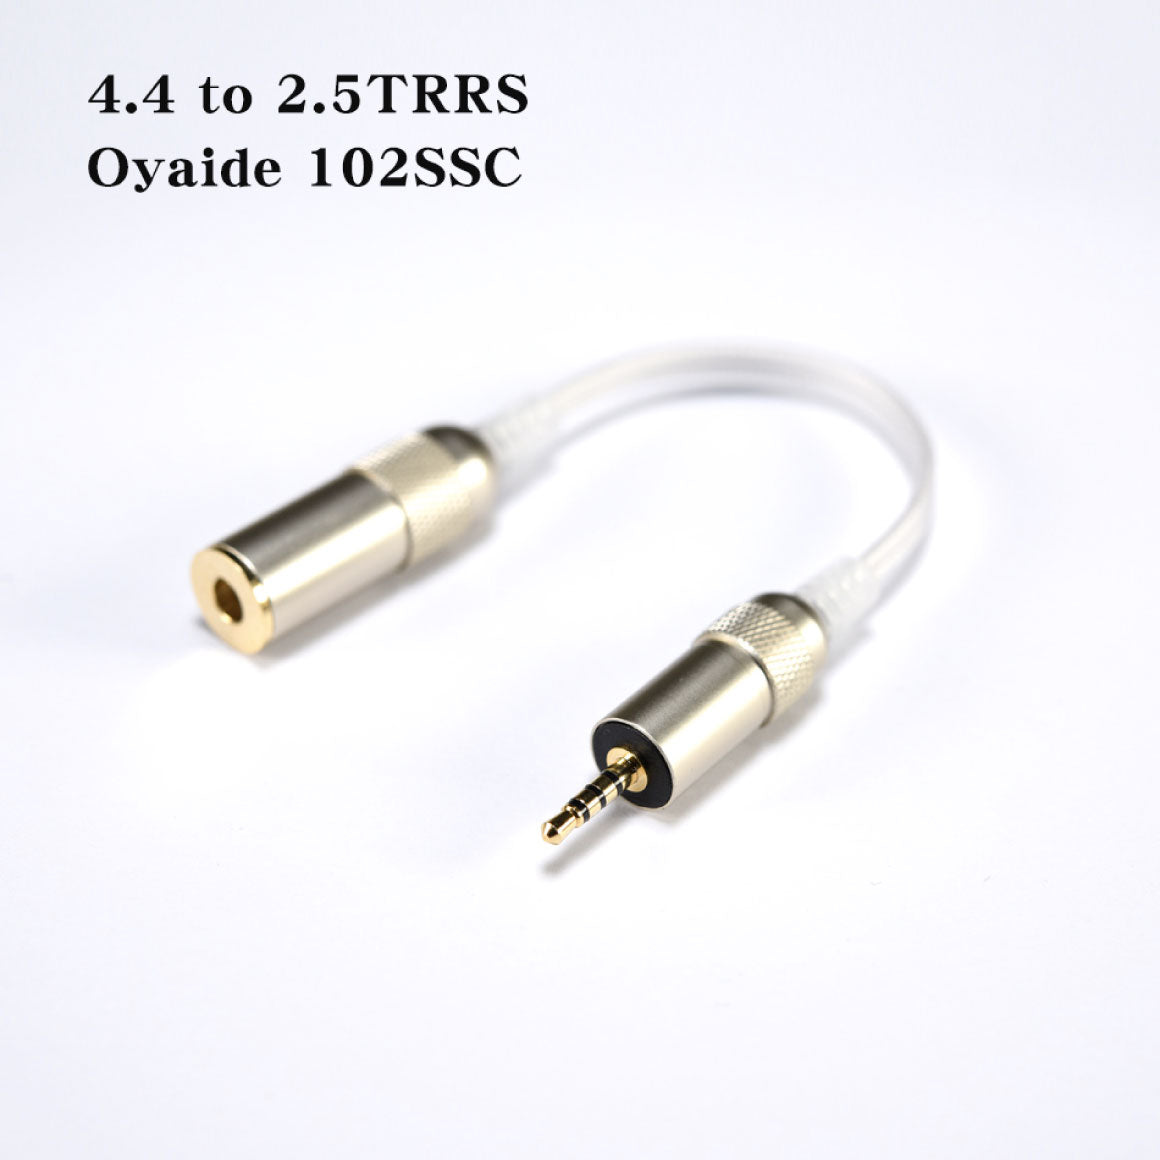 Headphone-Zone-Venture Electronics - Adapter Cables - 4.4mm Female - 2.5TRRS